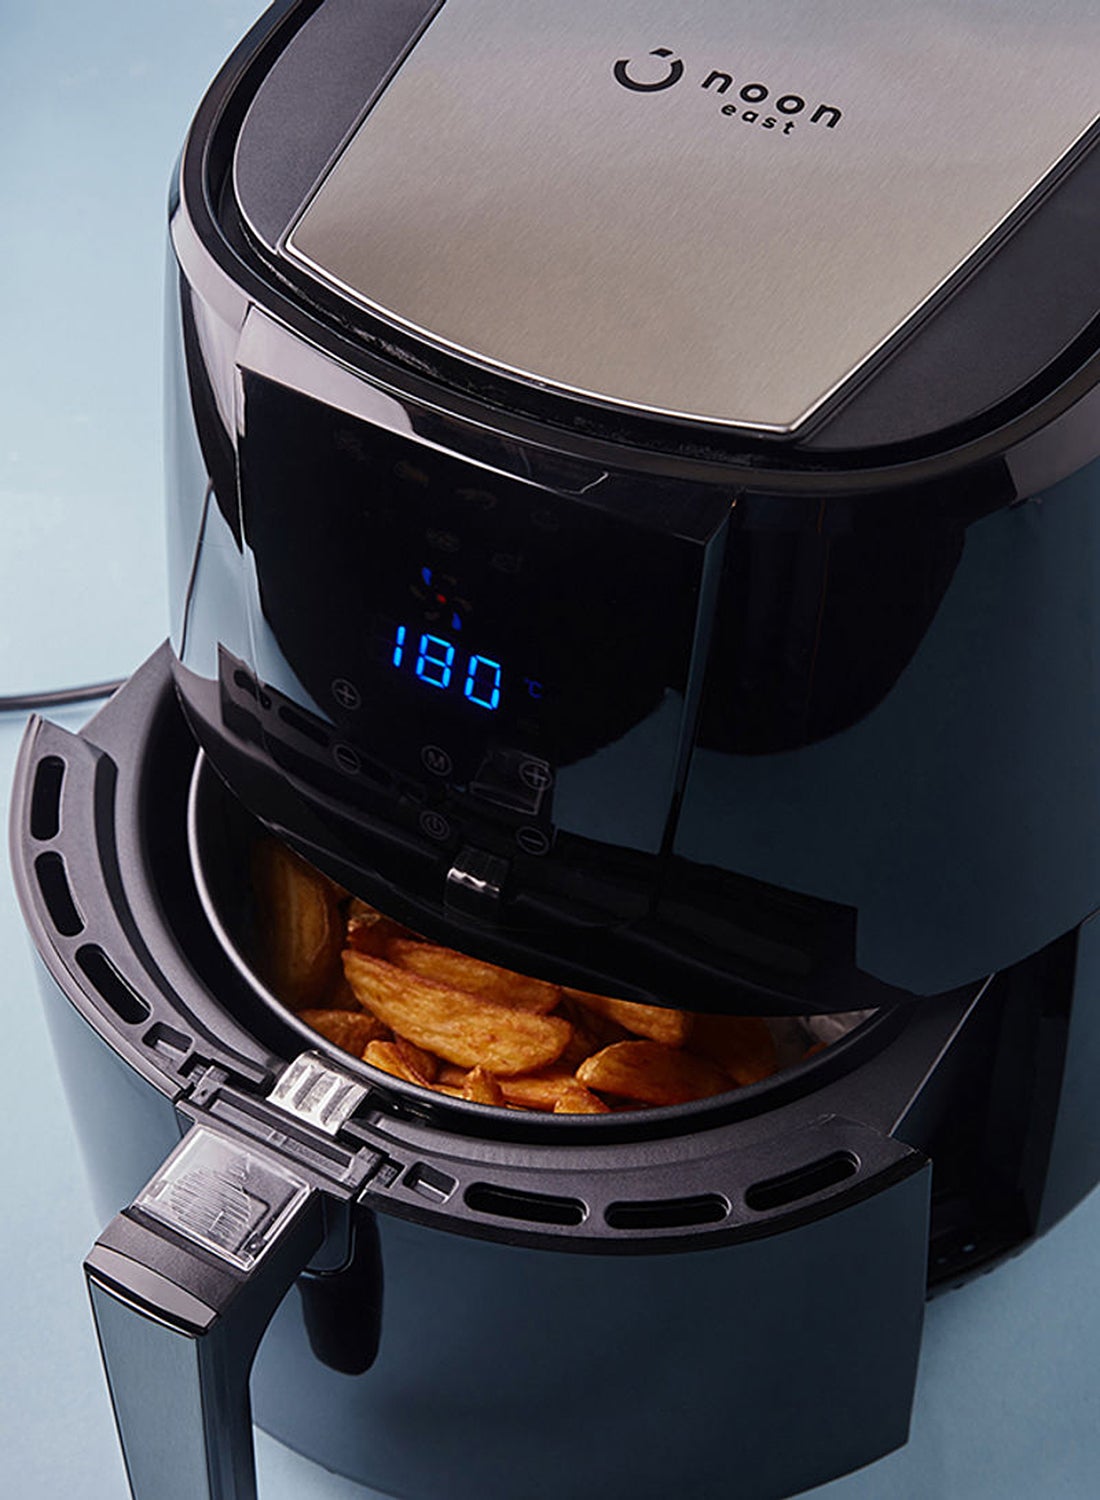 Digital Touch Air Fryer 3.2 Liter Capacity - Overload Protection - Healthy Air Fryer Without Oil 